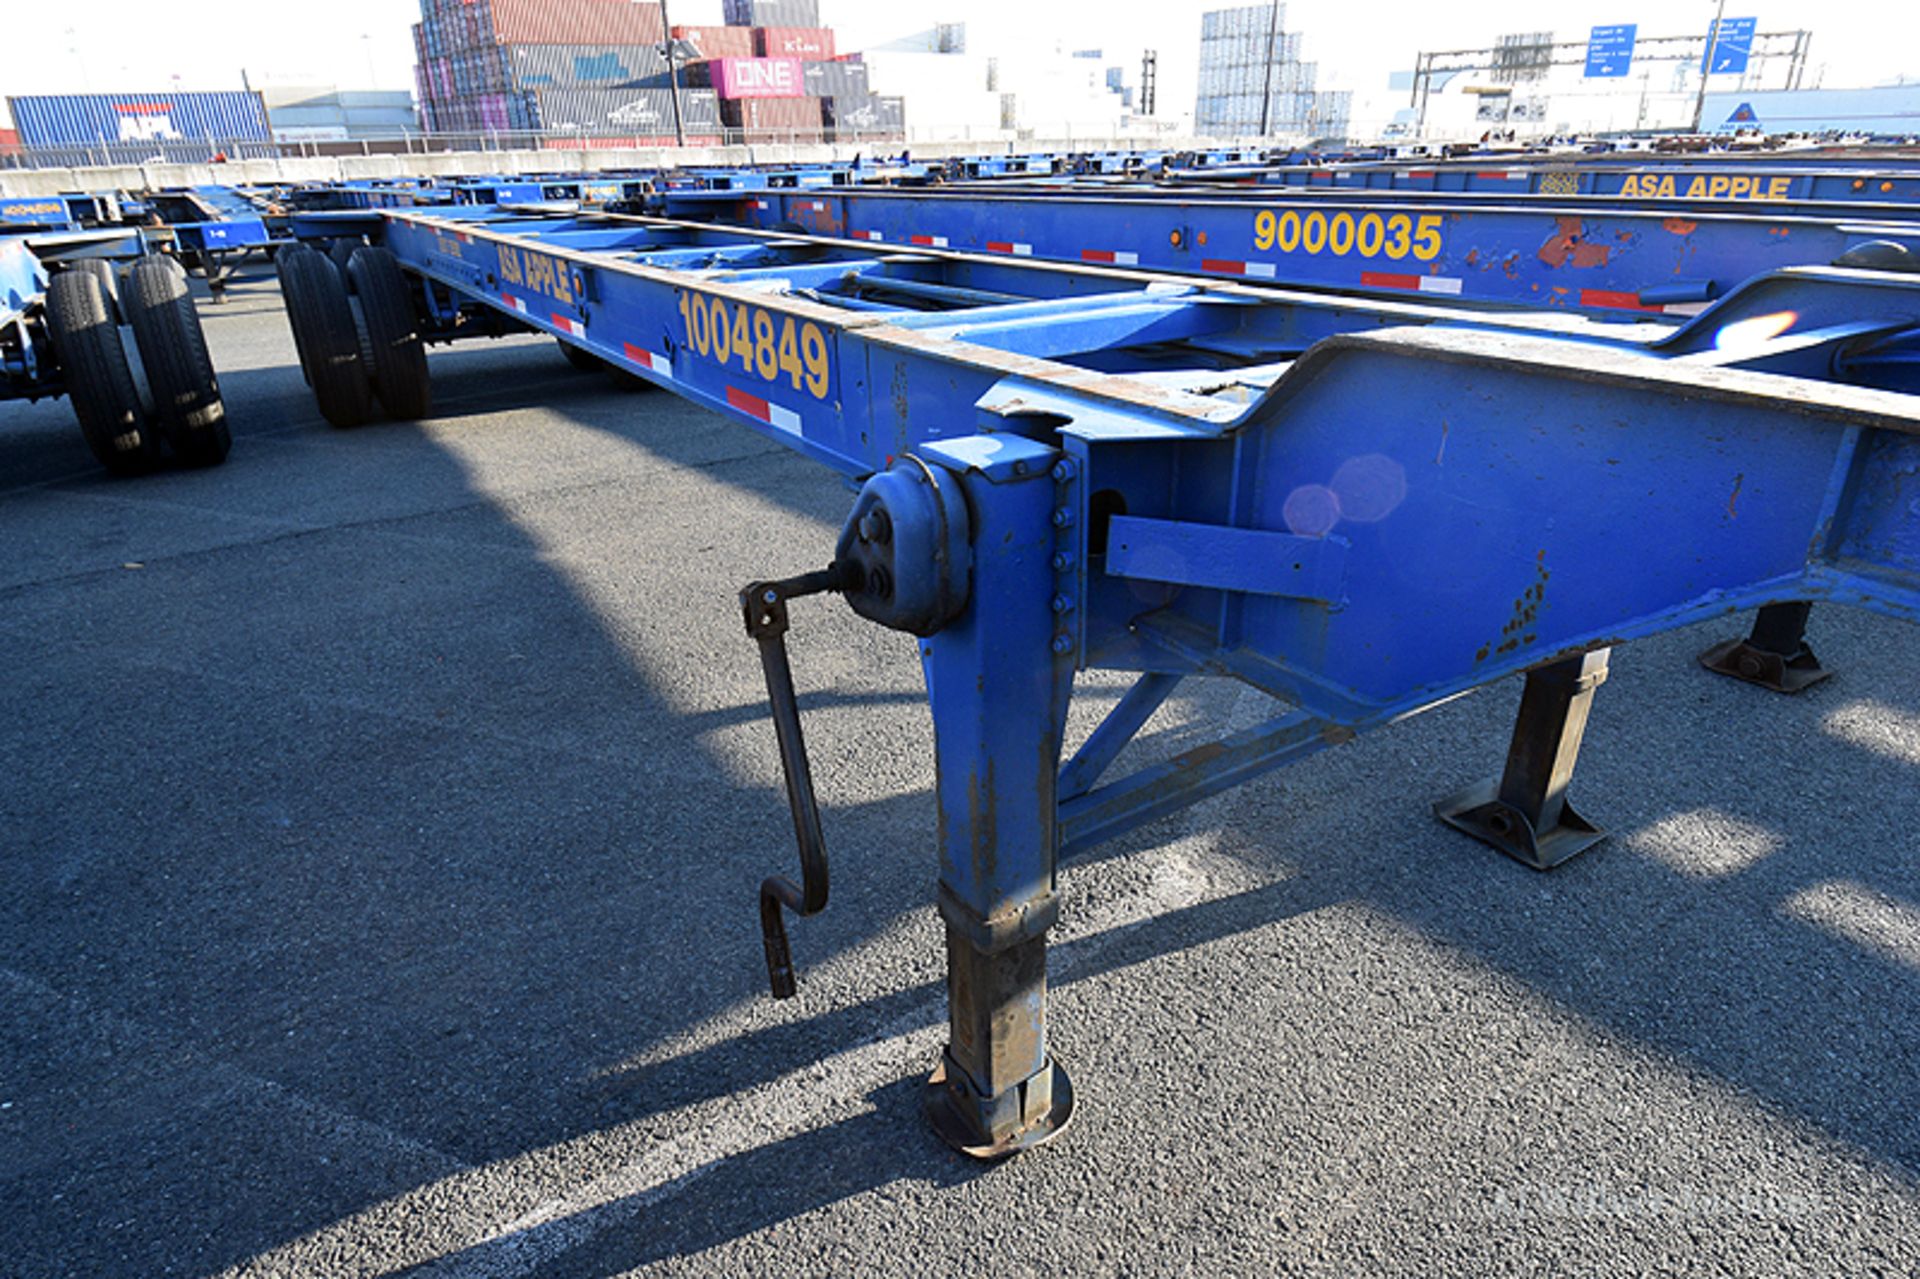 1995 Monon 40' to 48'-0 gooseneck slider container chassis VIN 1NNC04824SM246640 (Unit #1004849) - Image 2 of 4